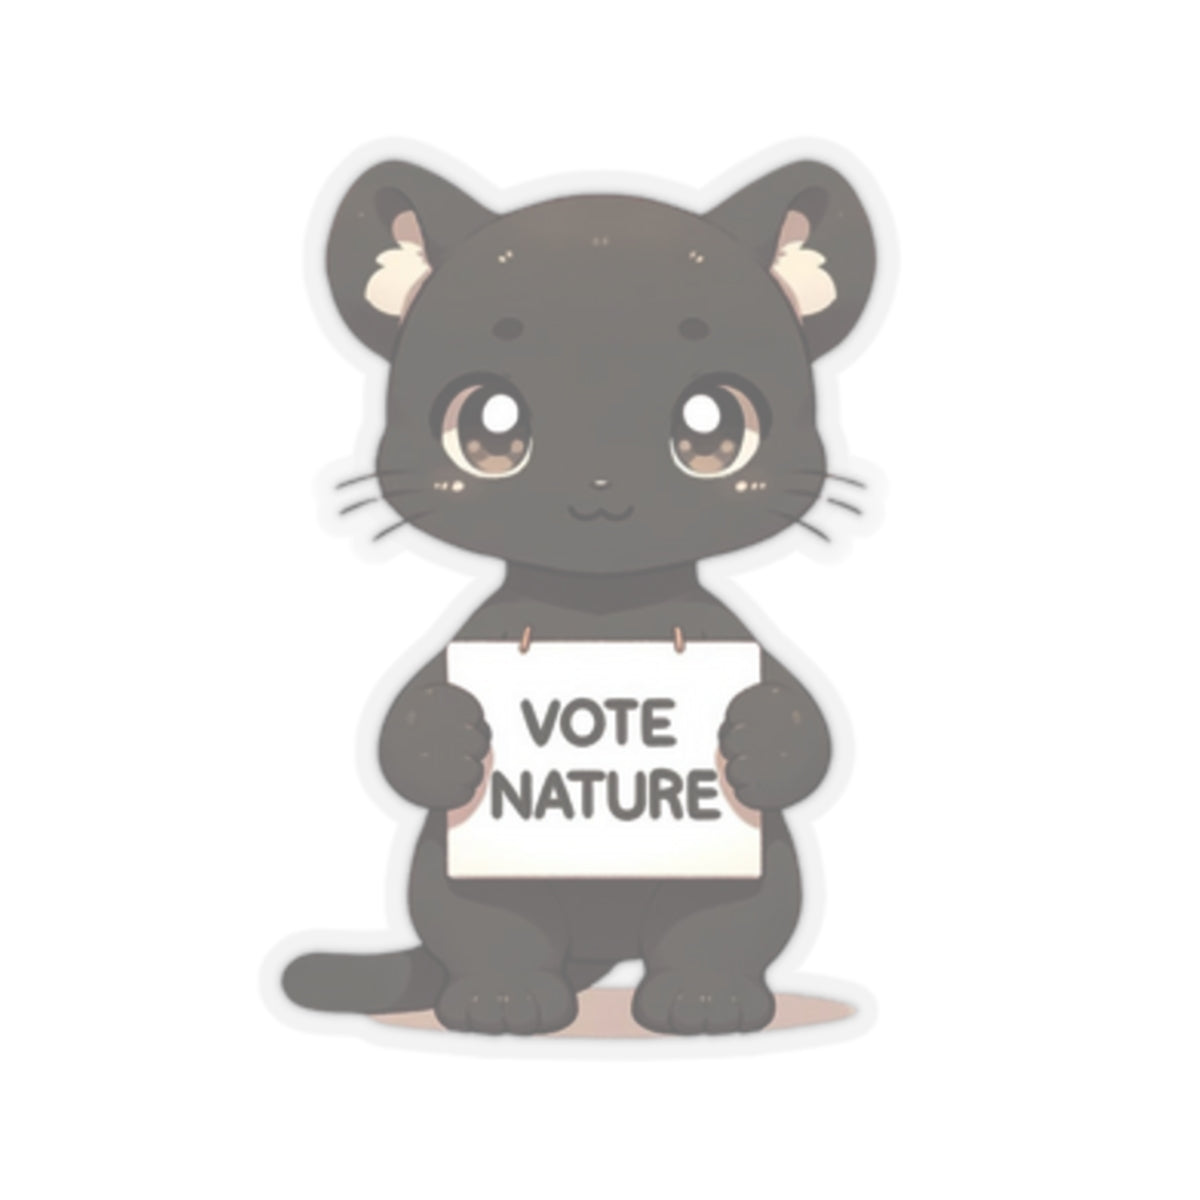 Inspirational Cute Panther Statement vinyl Sticker: Vote Nature! for laptop, kindle, phone, ipad, instrument case, notebook, mood board